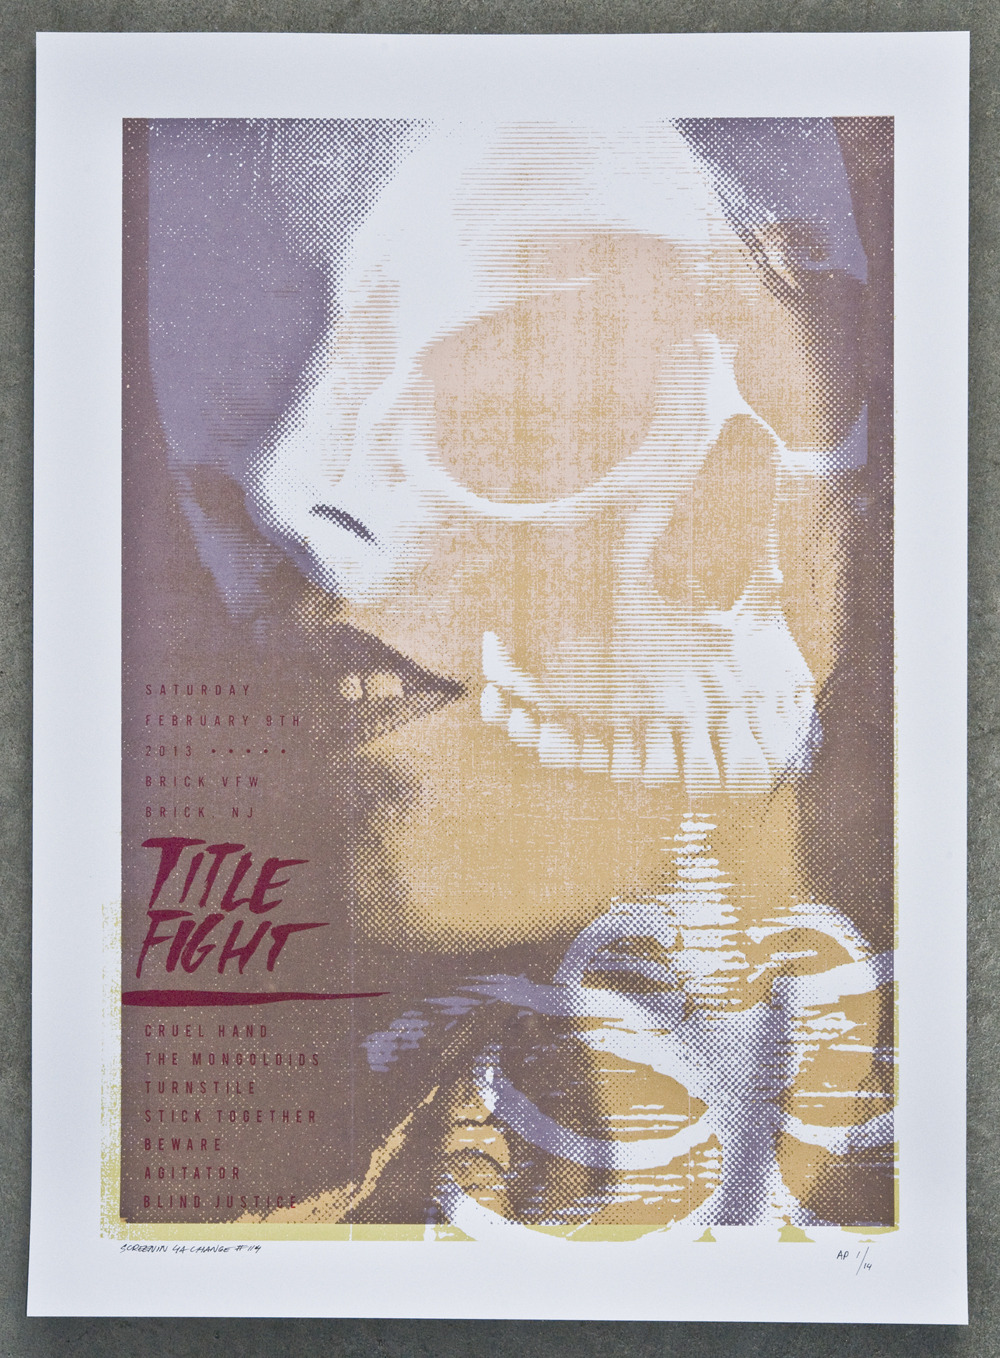 Title Fight 18" x 24" screen printed poster, designed & printed by Screenin 4 A Change in an edition of 120. go to the show in Brick NJ if you want one…